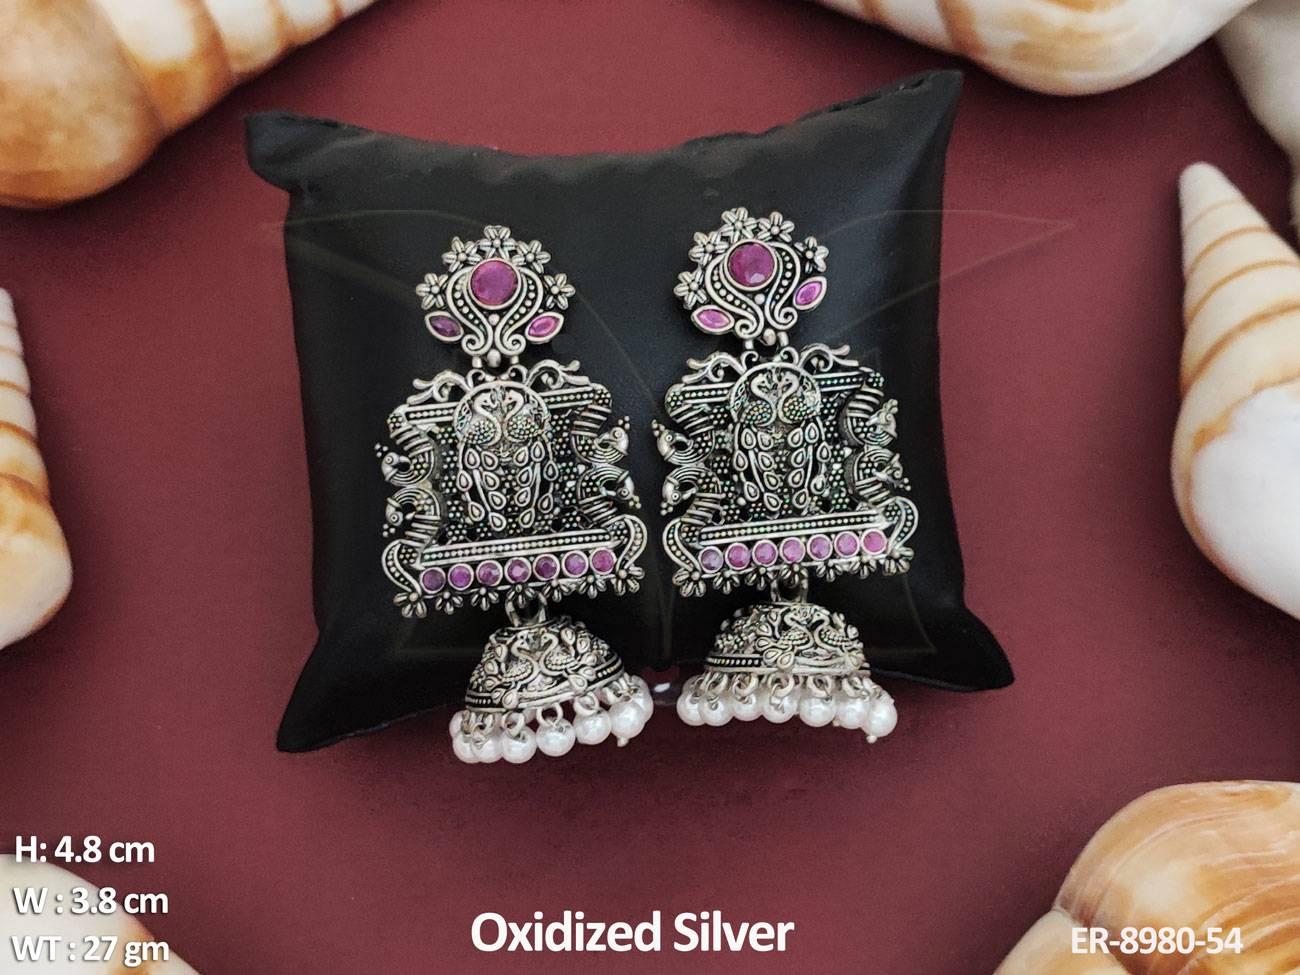 Made with high-quality materials, these earrings are not only stunning but also durable.